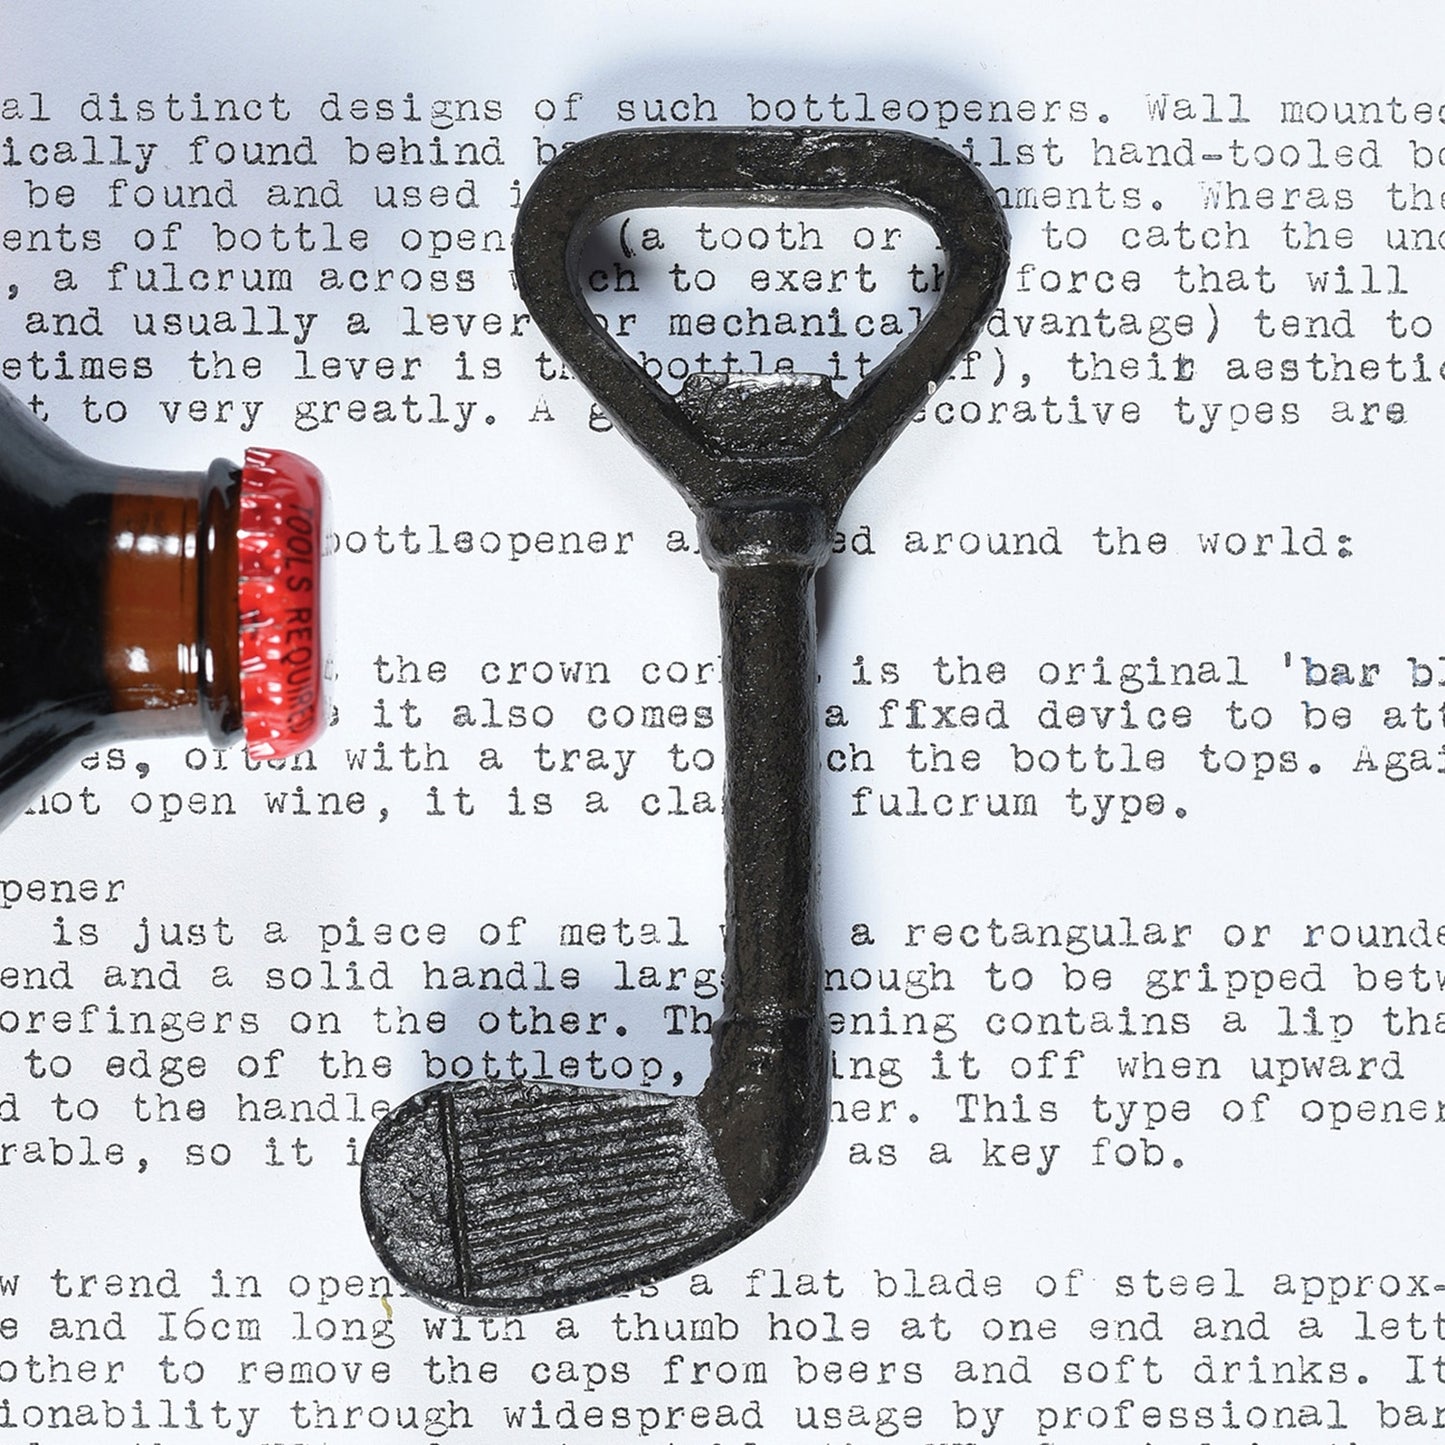 Image of a cast iron golf club bottle opener next to a bottle cap.